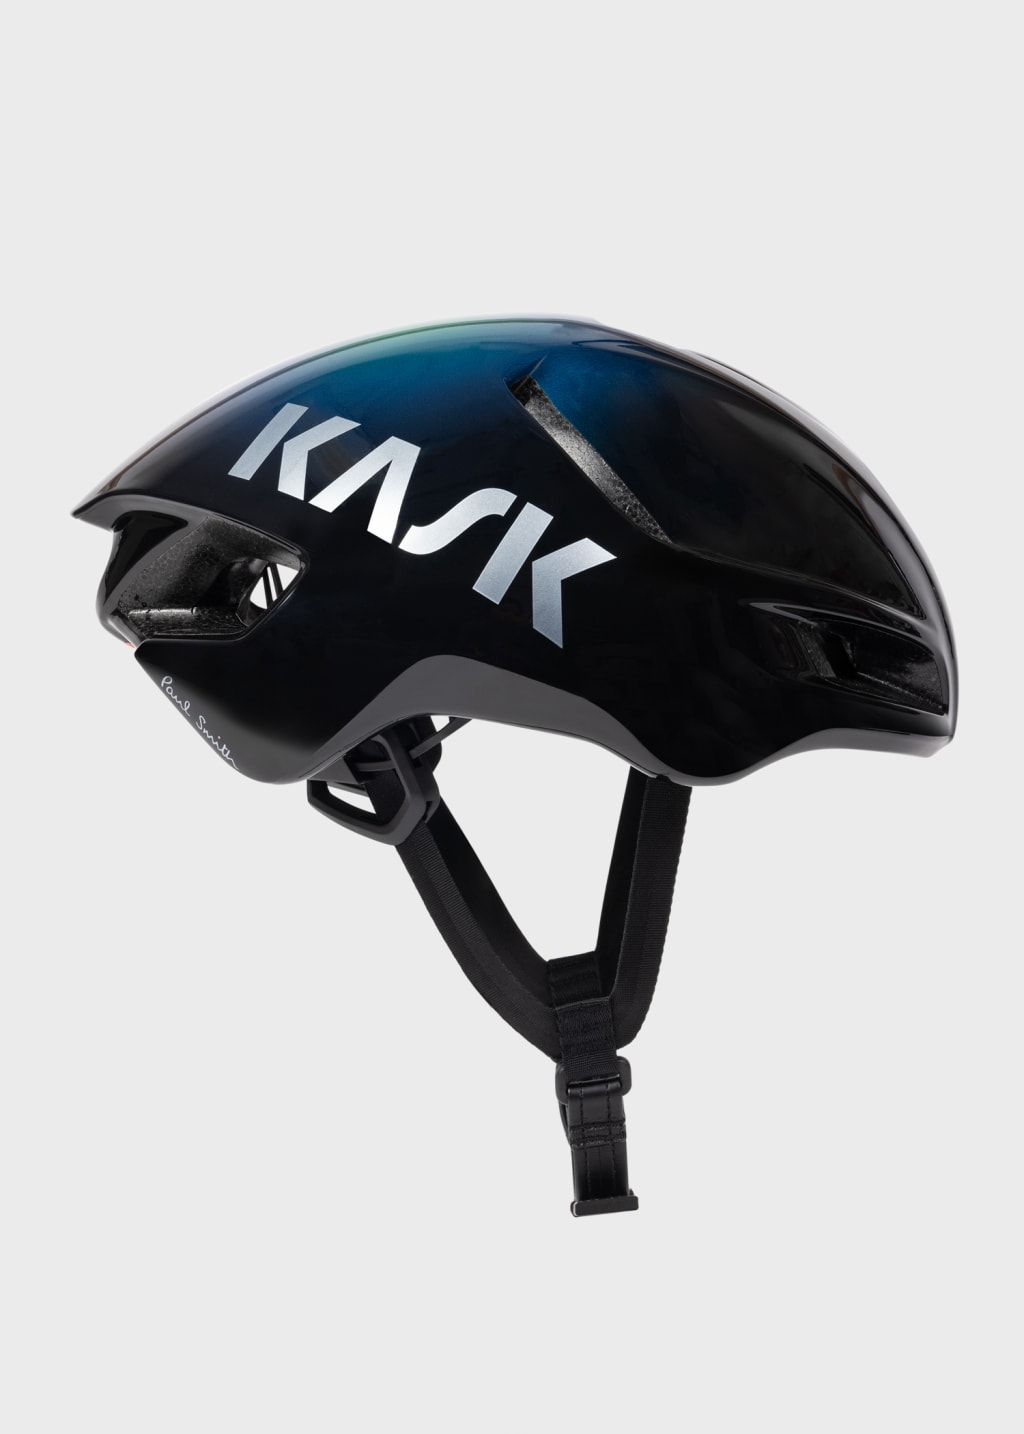 Product View - Paul Smith + Kask 'Ombre Green' Utopia Cycling Helmet